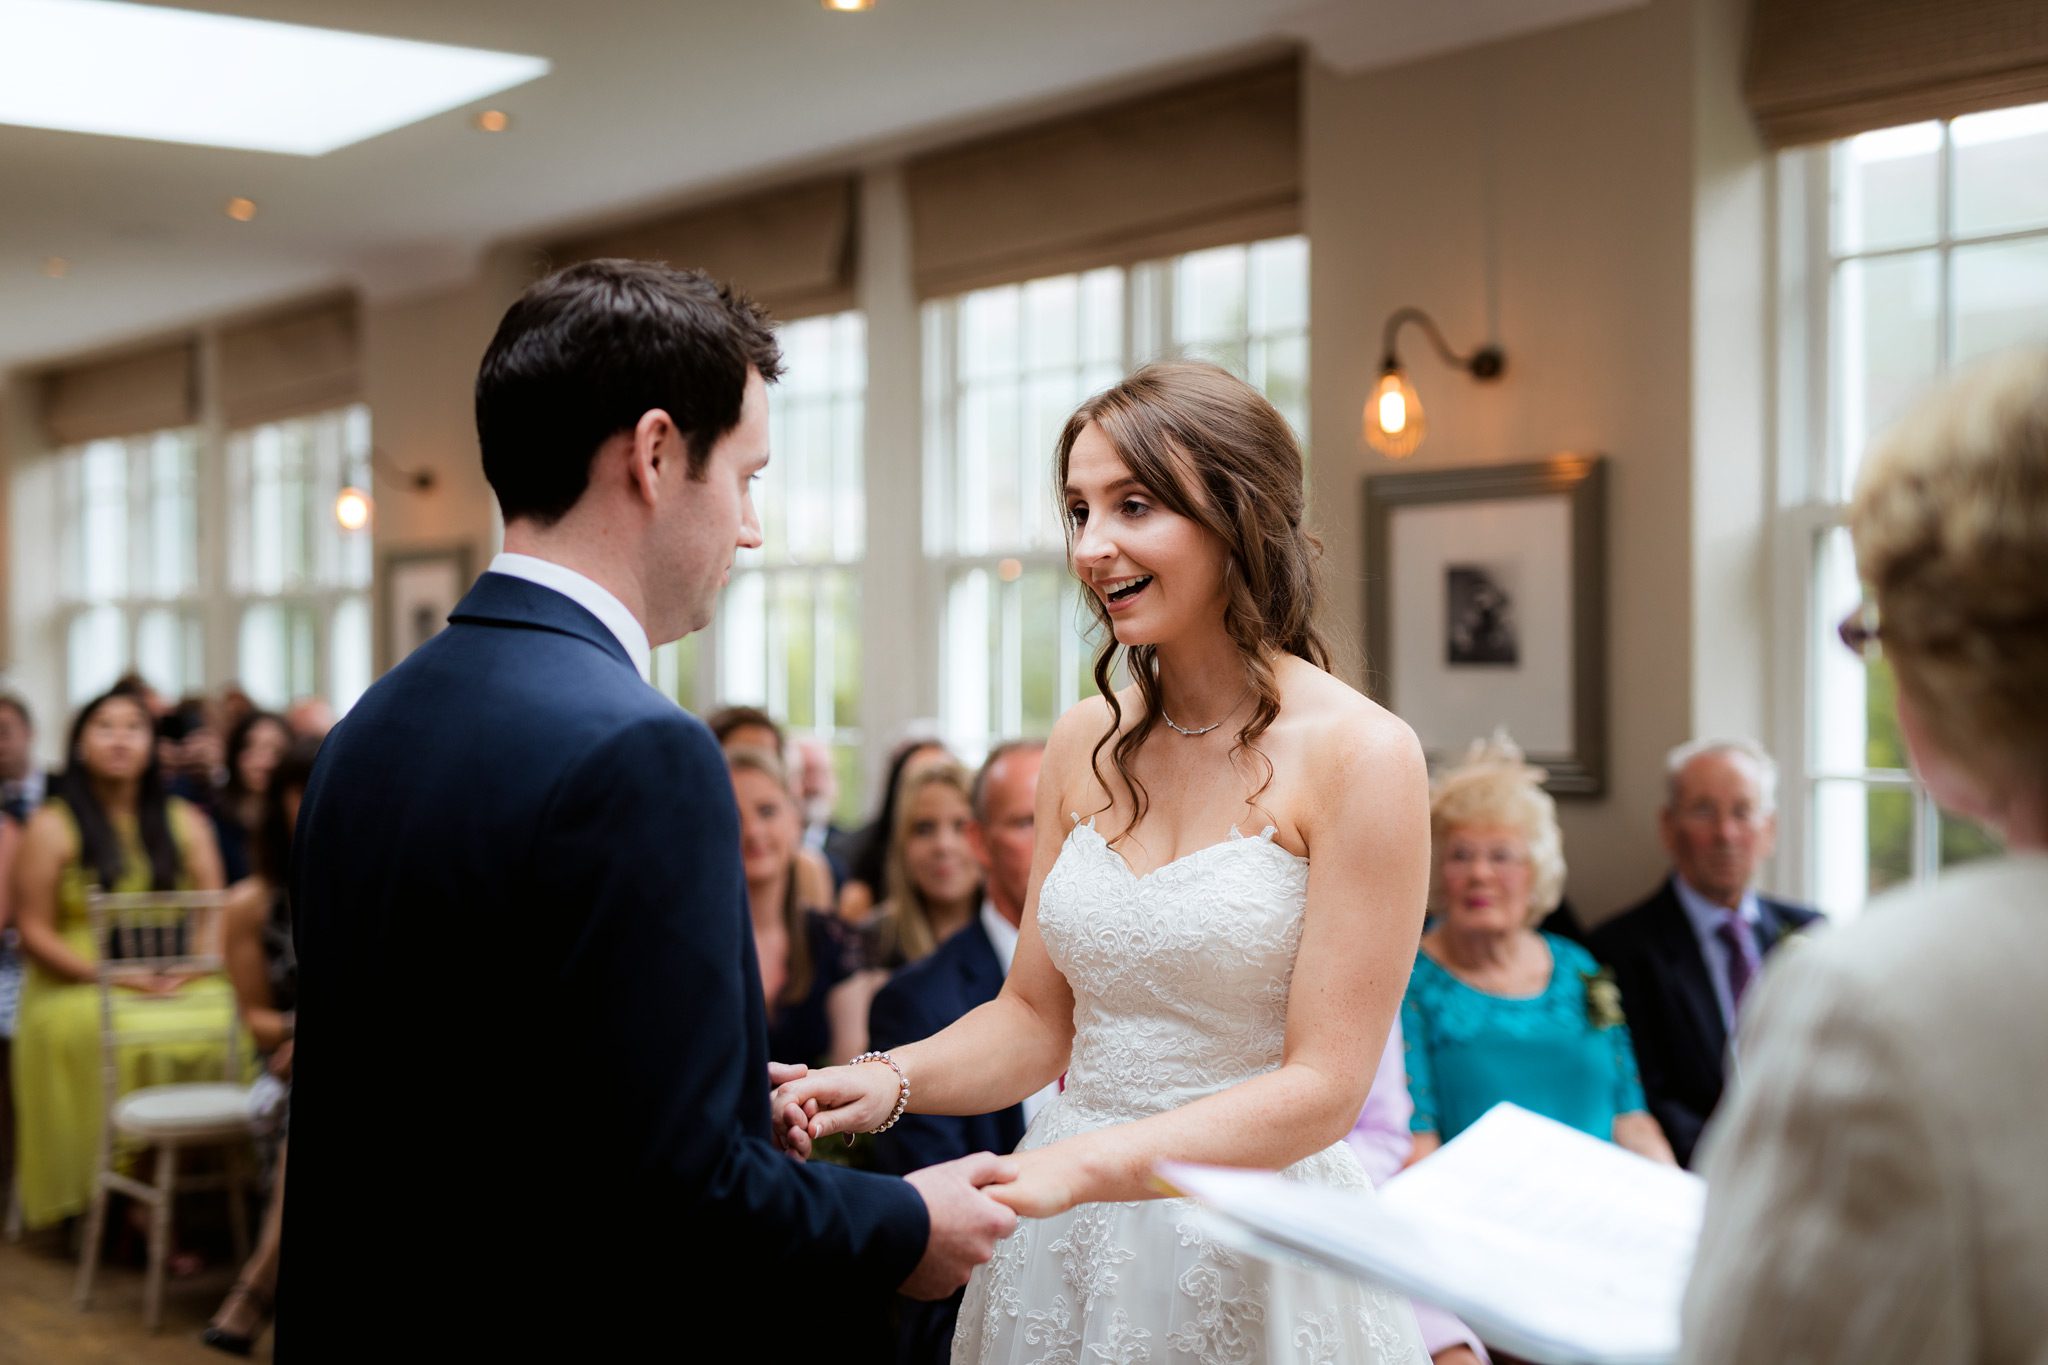 Sarah and Ryan exchanging vows at Losehill House.